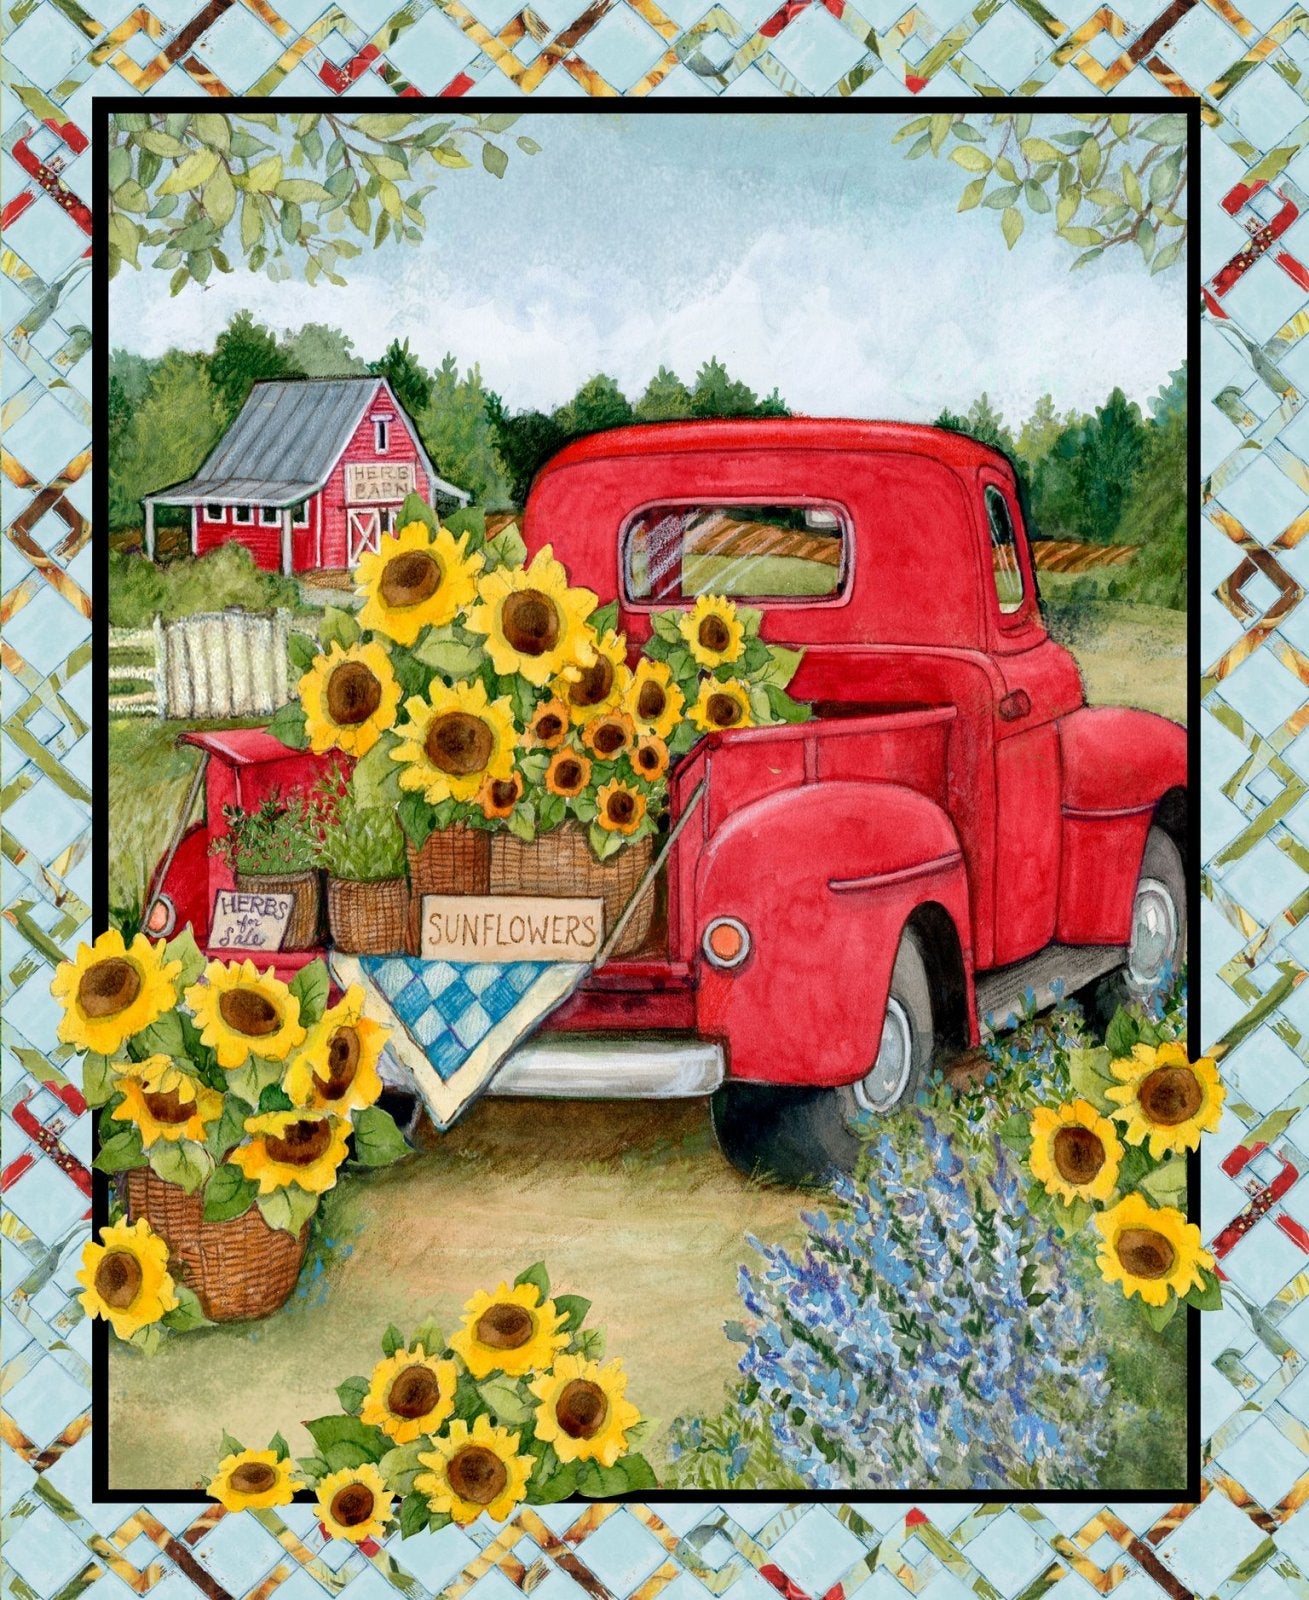 This fabric quilt panel features a vintage red pickup truck filled with baskets full of sunflowers and a red barn in the background